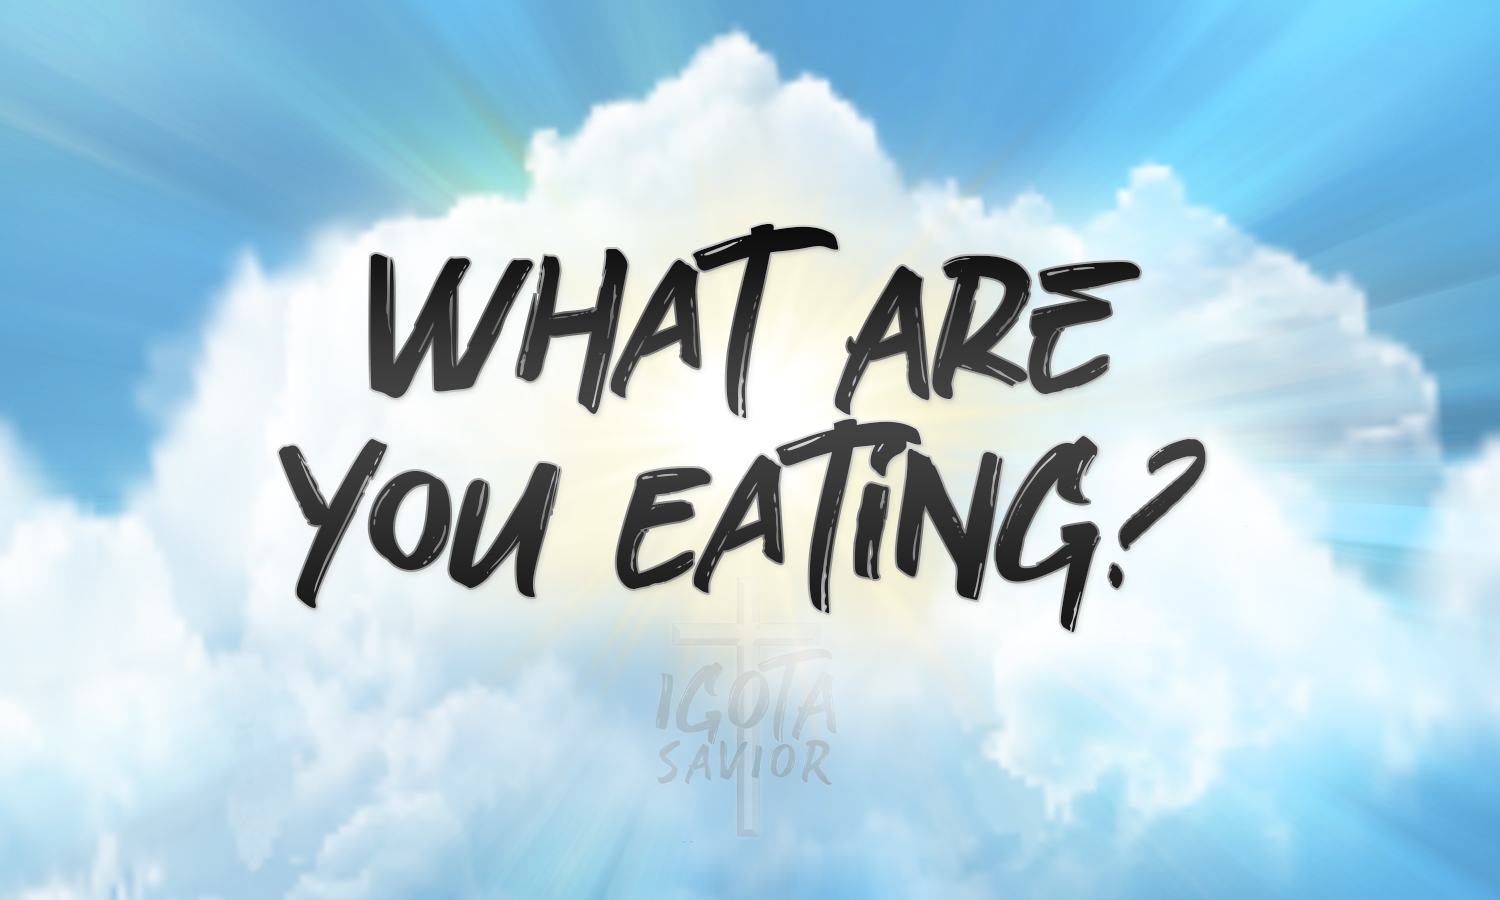 What Are You Eating?